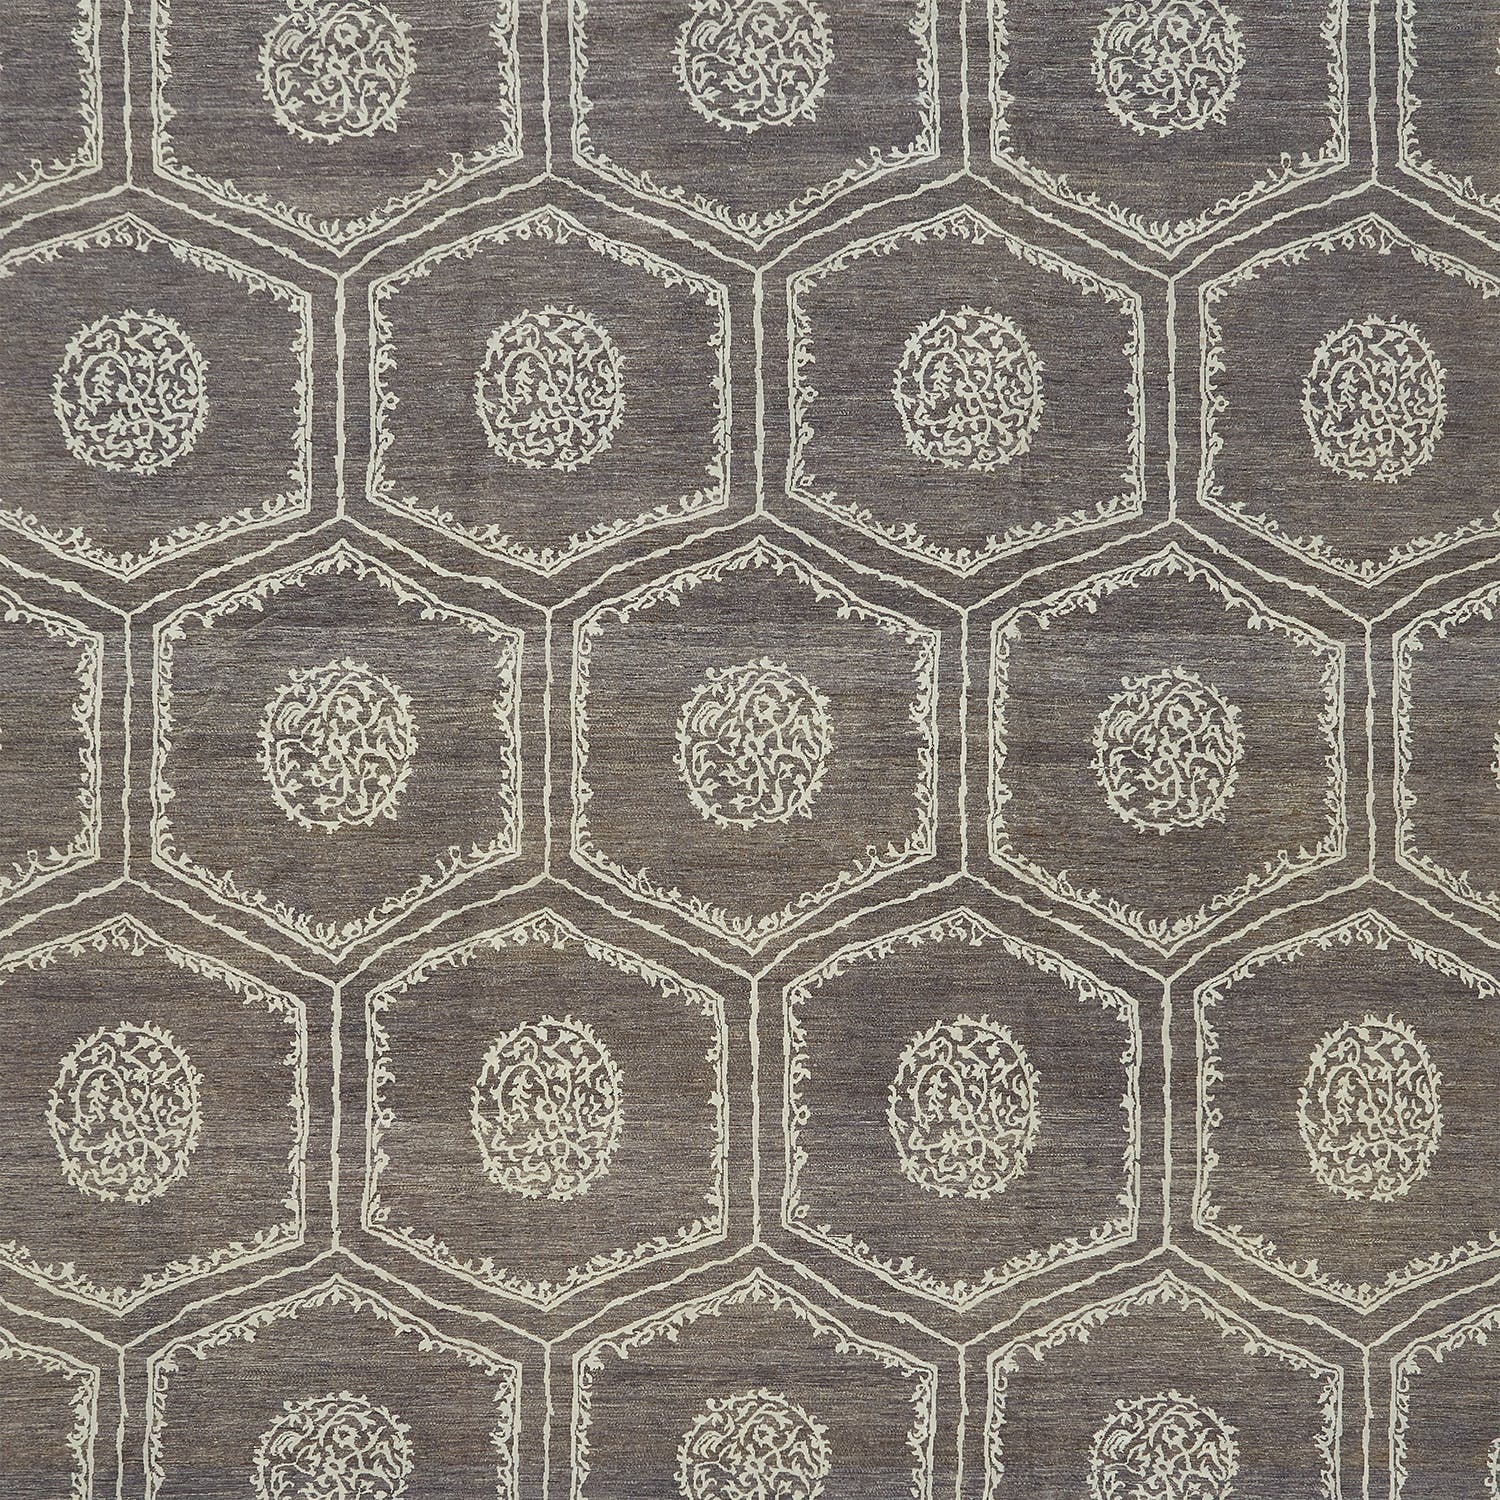 Close-up of a geometric patterned fabric with floral motifs.